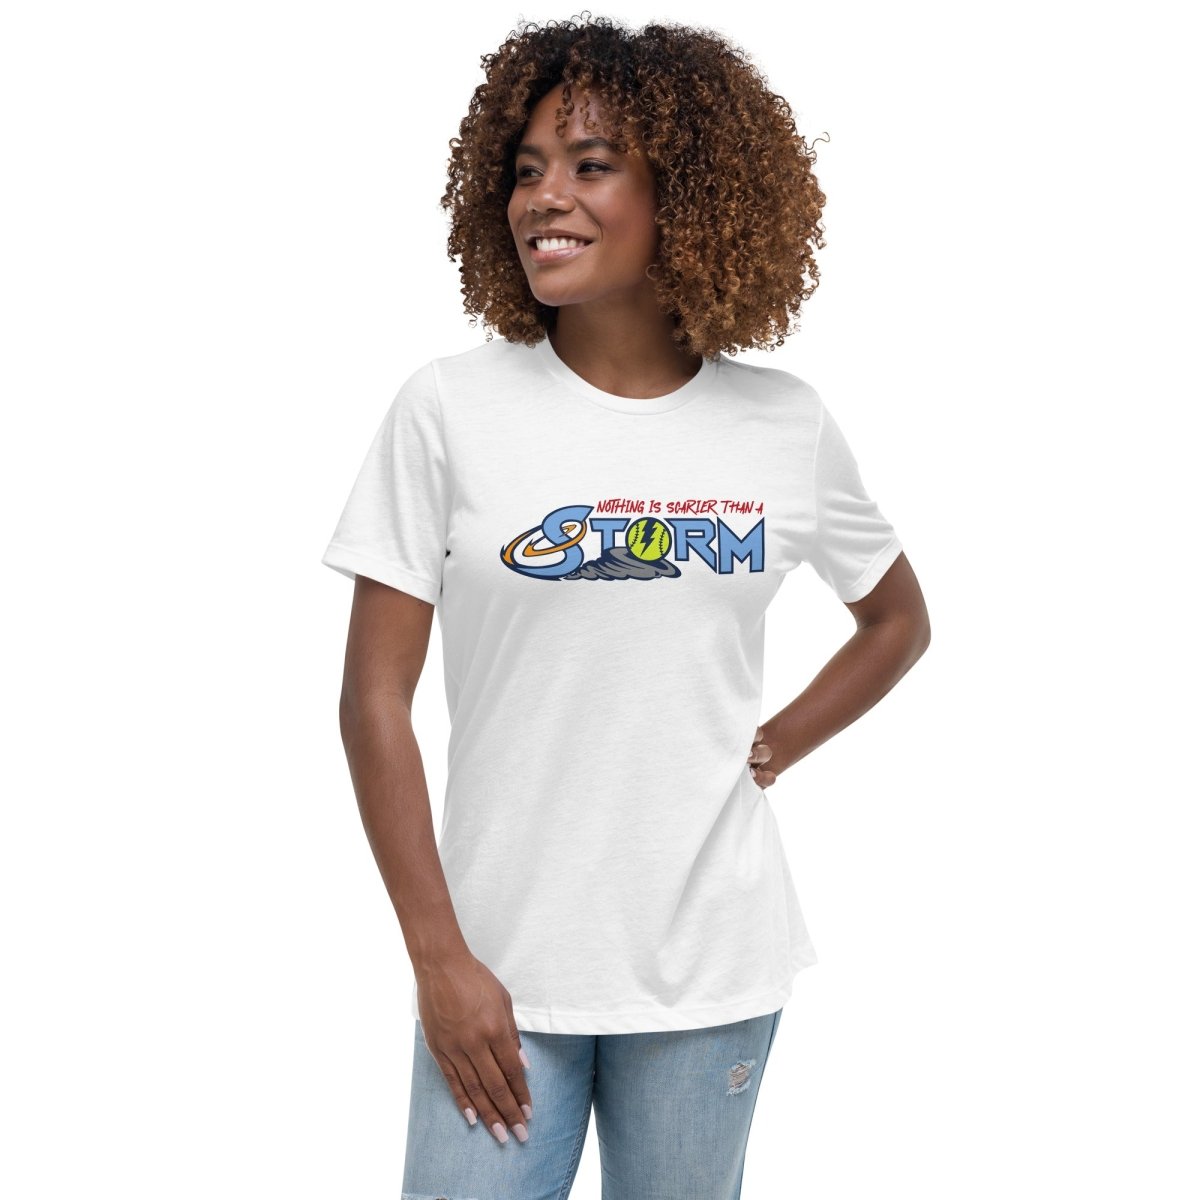 Scary Storm Women's Relaxed Tee